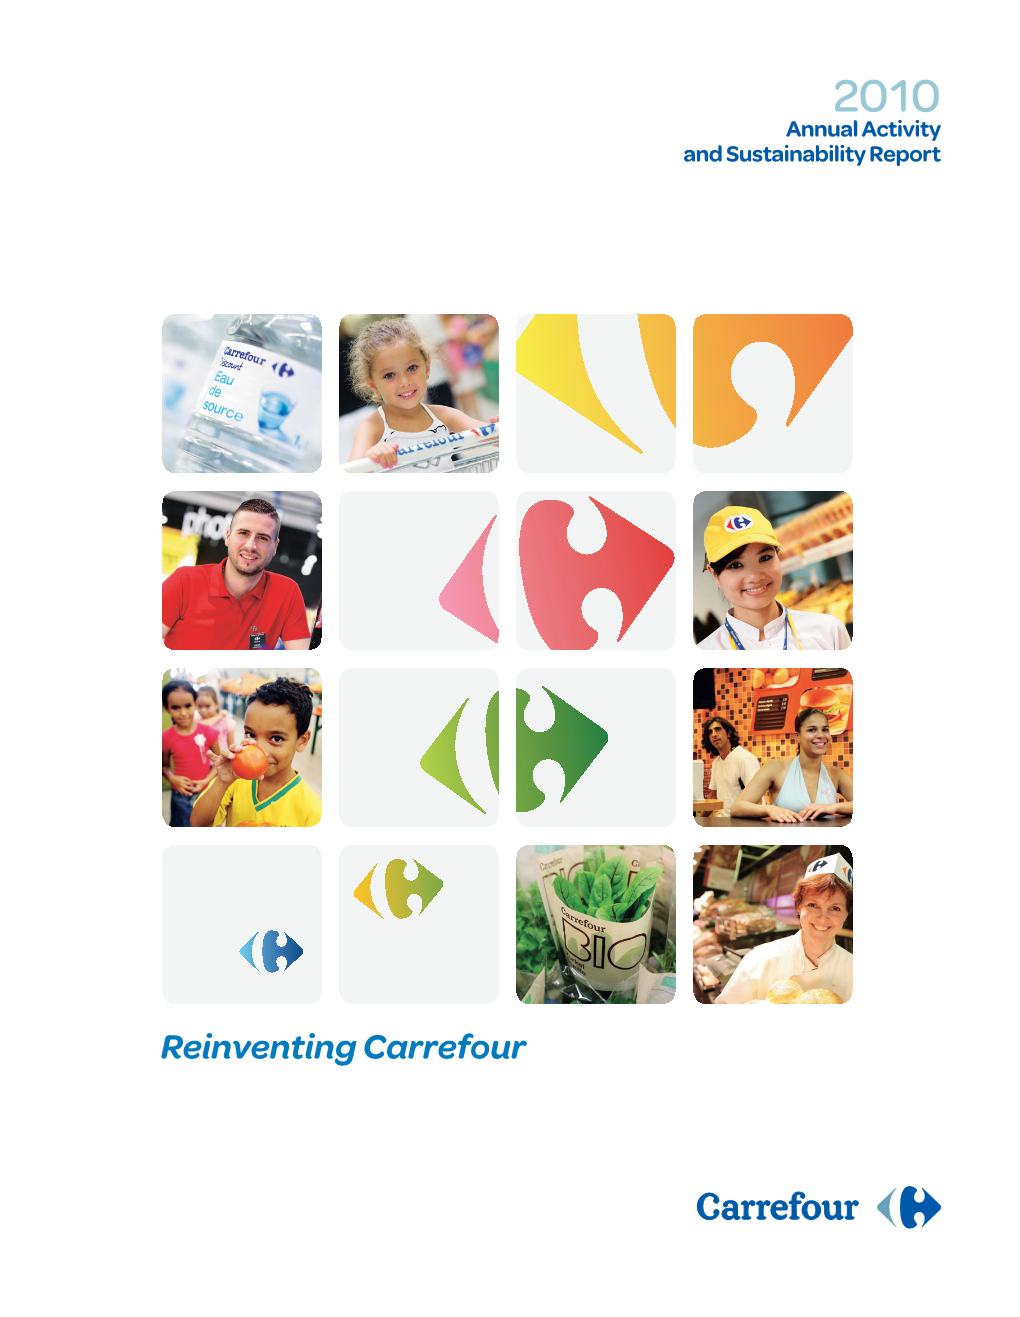 Reinventing Carrefour Annual Activity and Sustainability Report and Sustainability Annual Activity 2010 2010